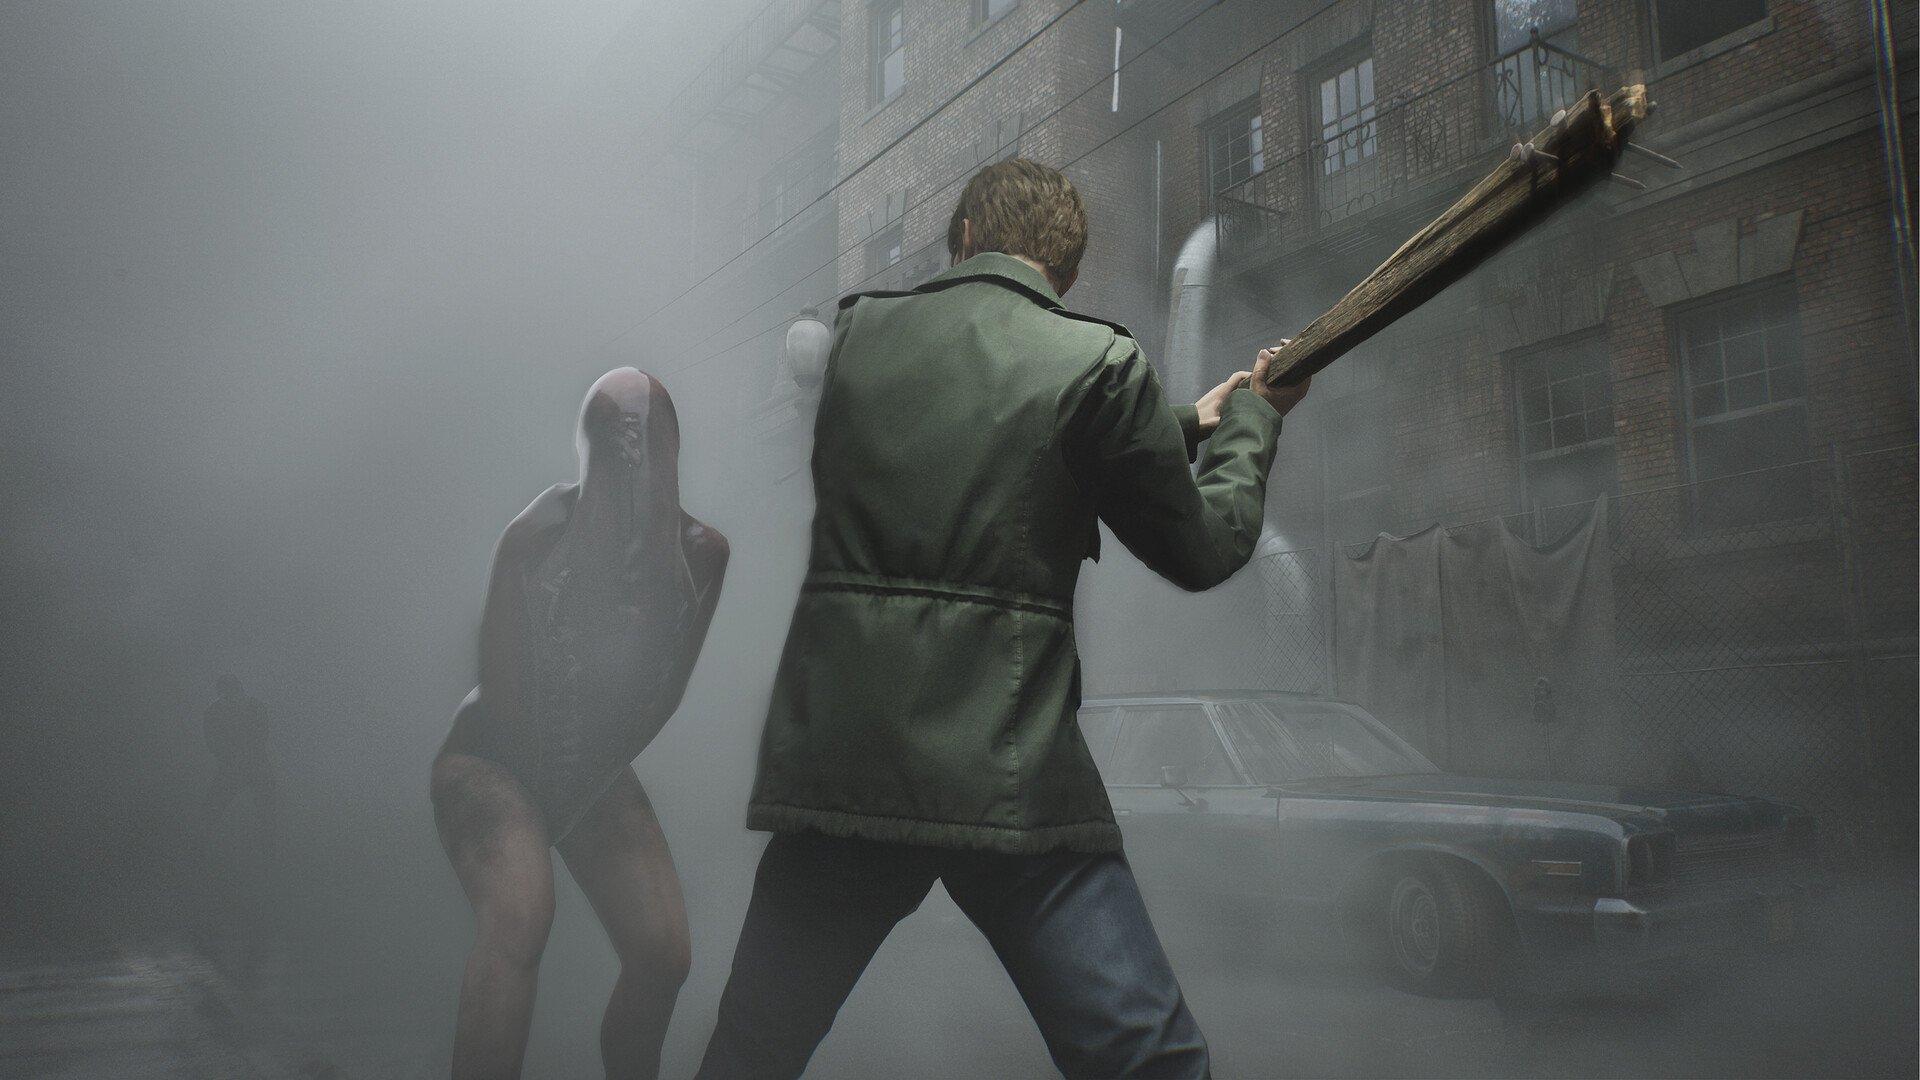 Silent Hill 2 for PlayStation 5